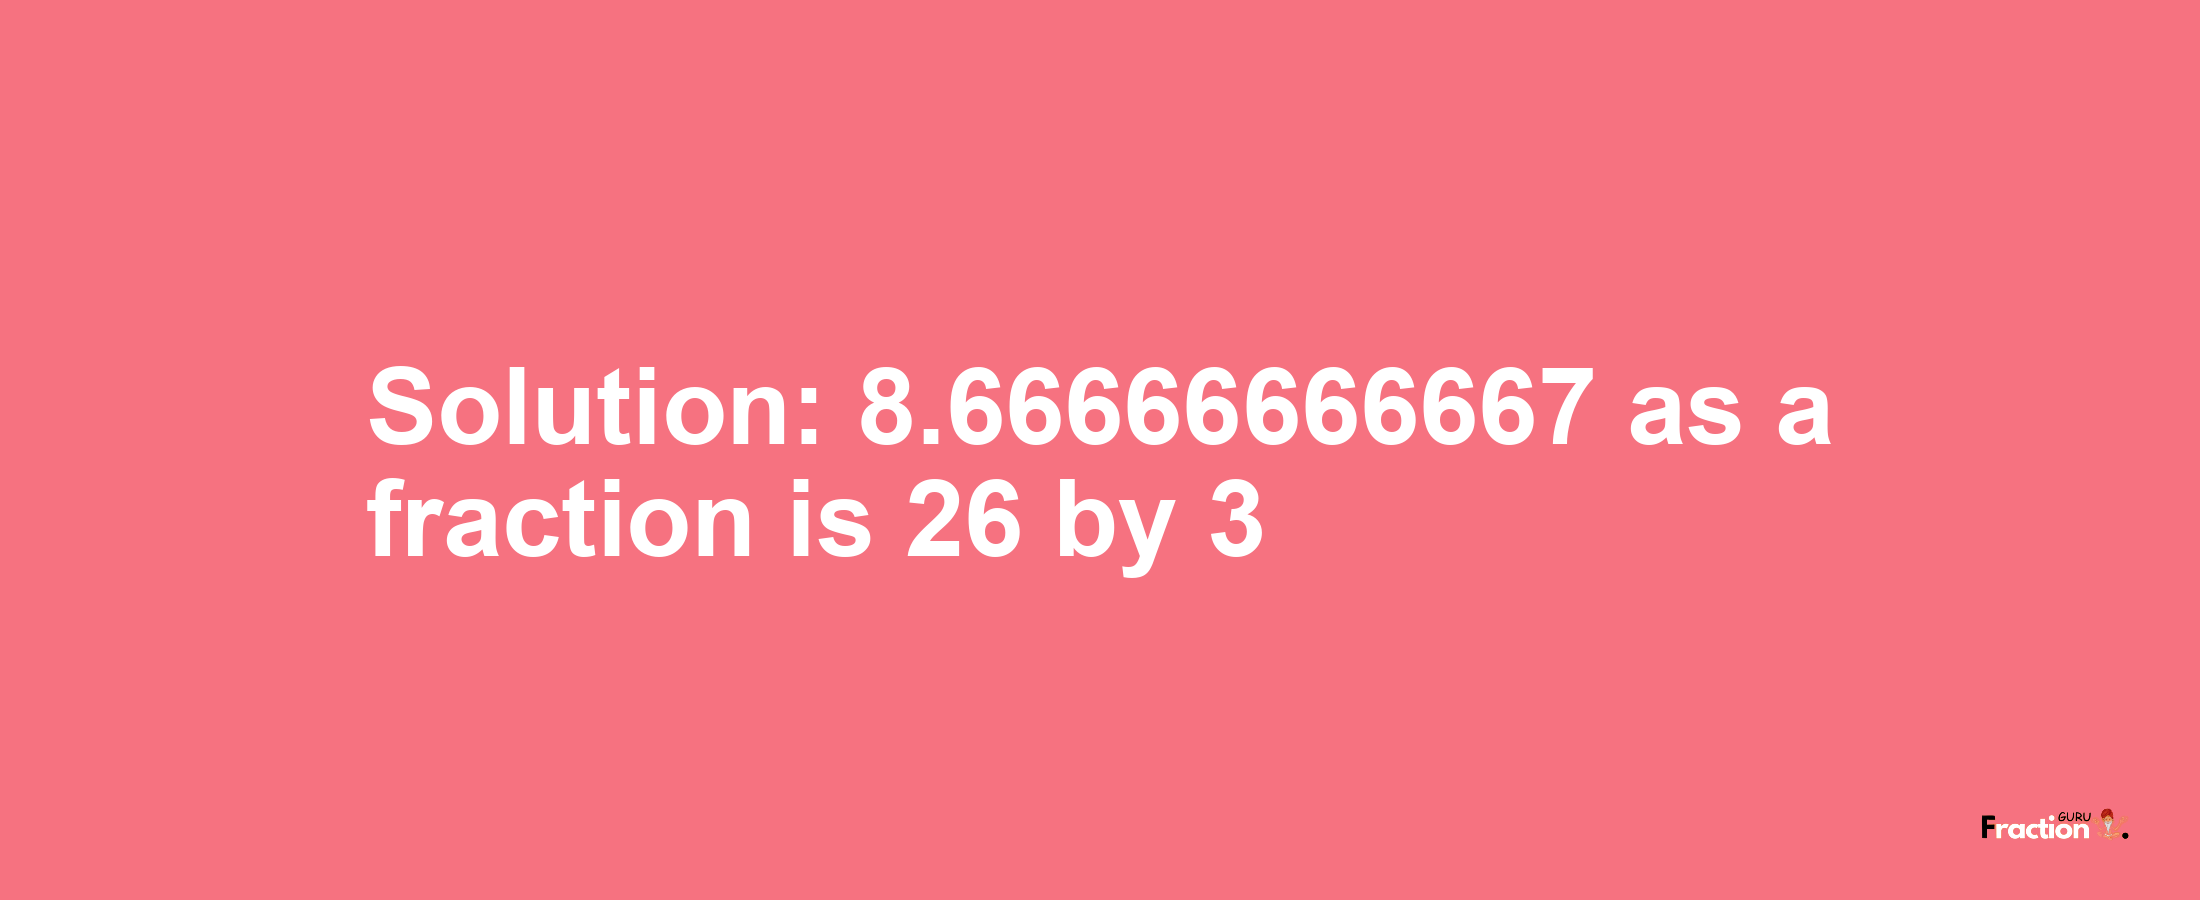 Solution:8.66666666667 as a fraction is 26/3